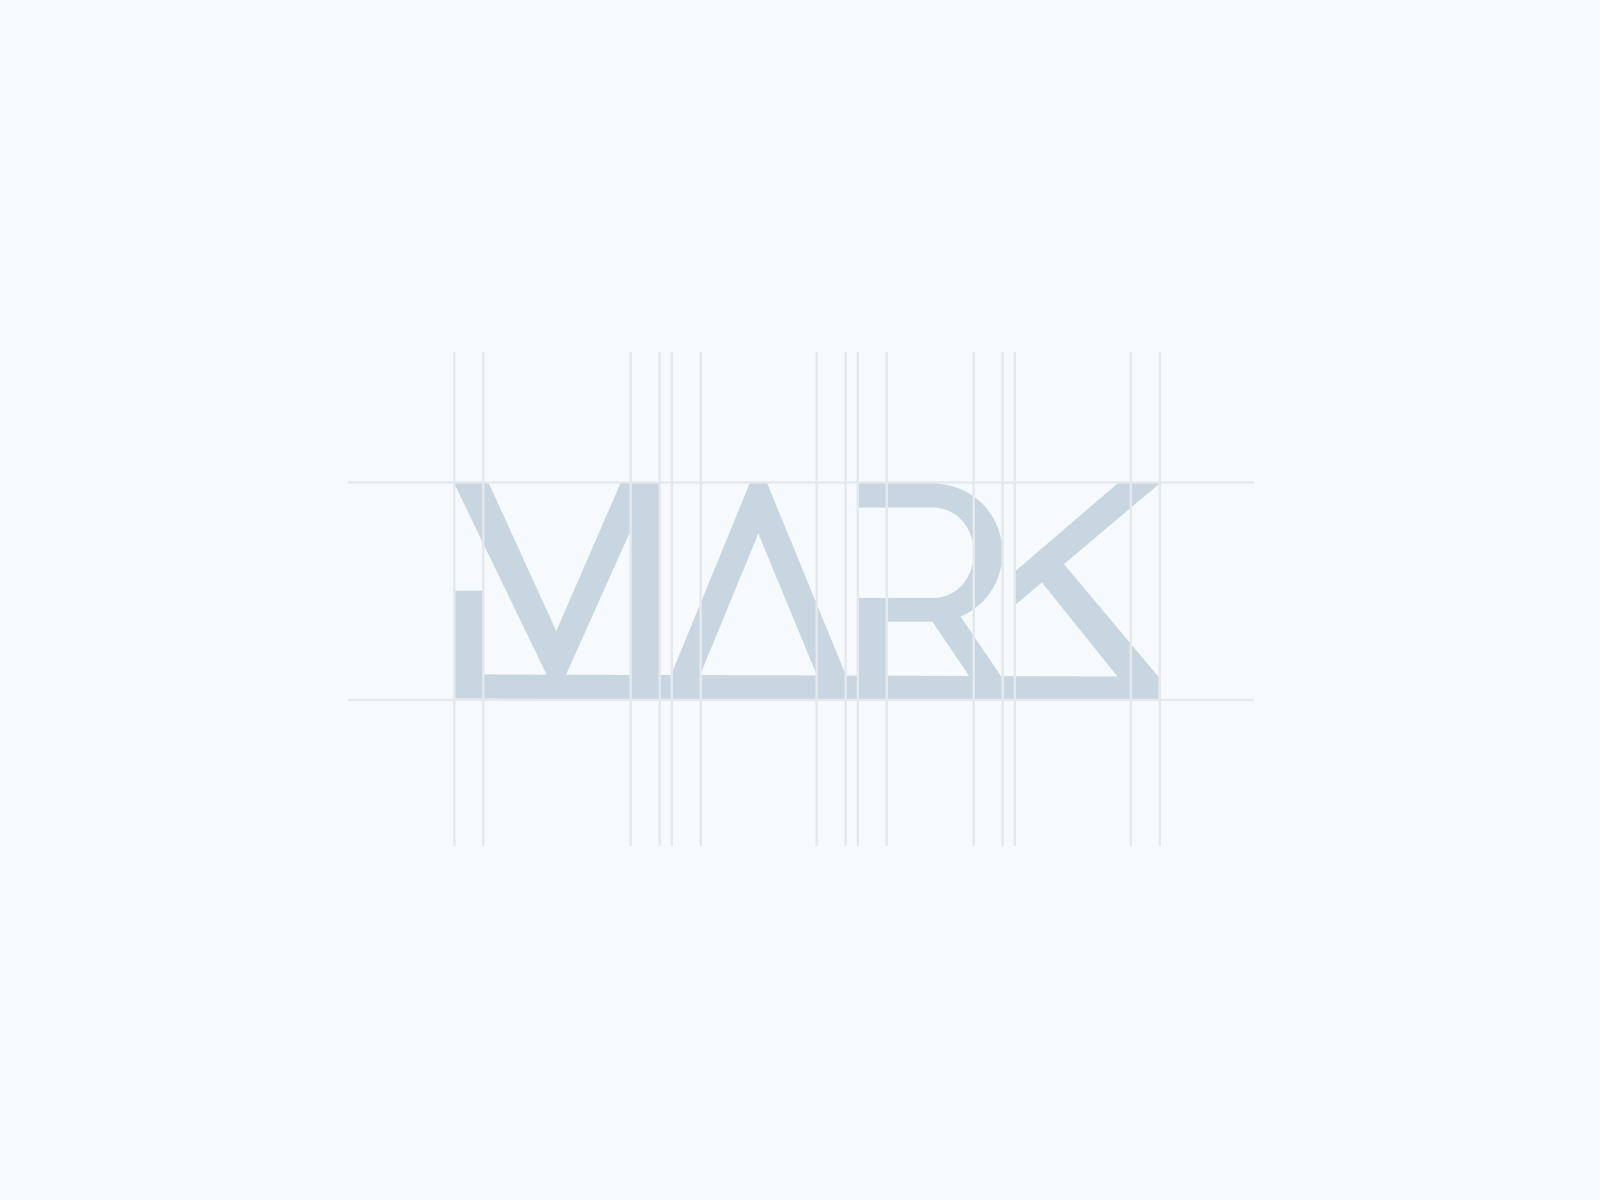 MARK, Agency of work abroad - Brand design